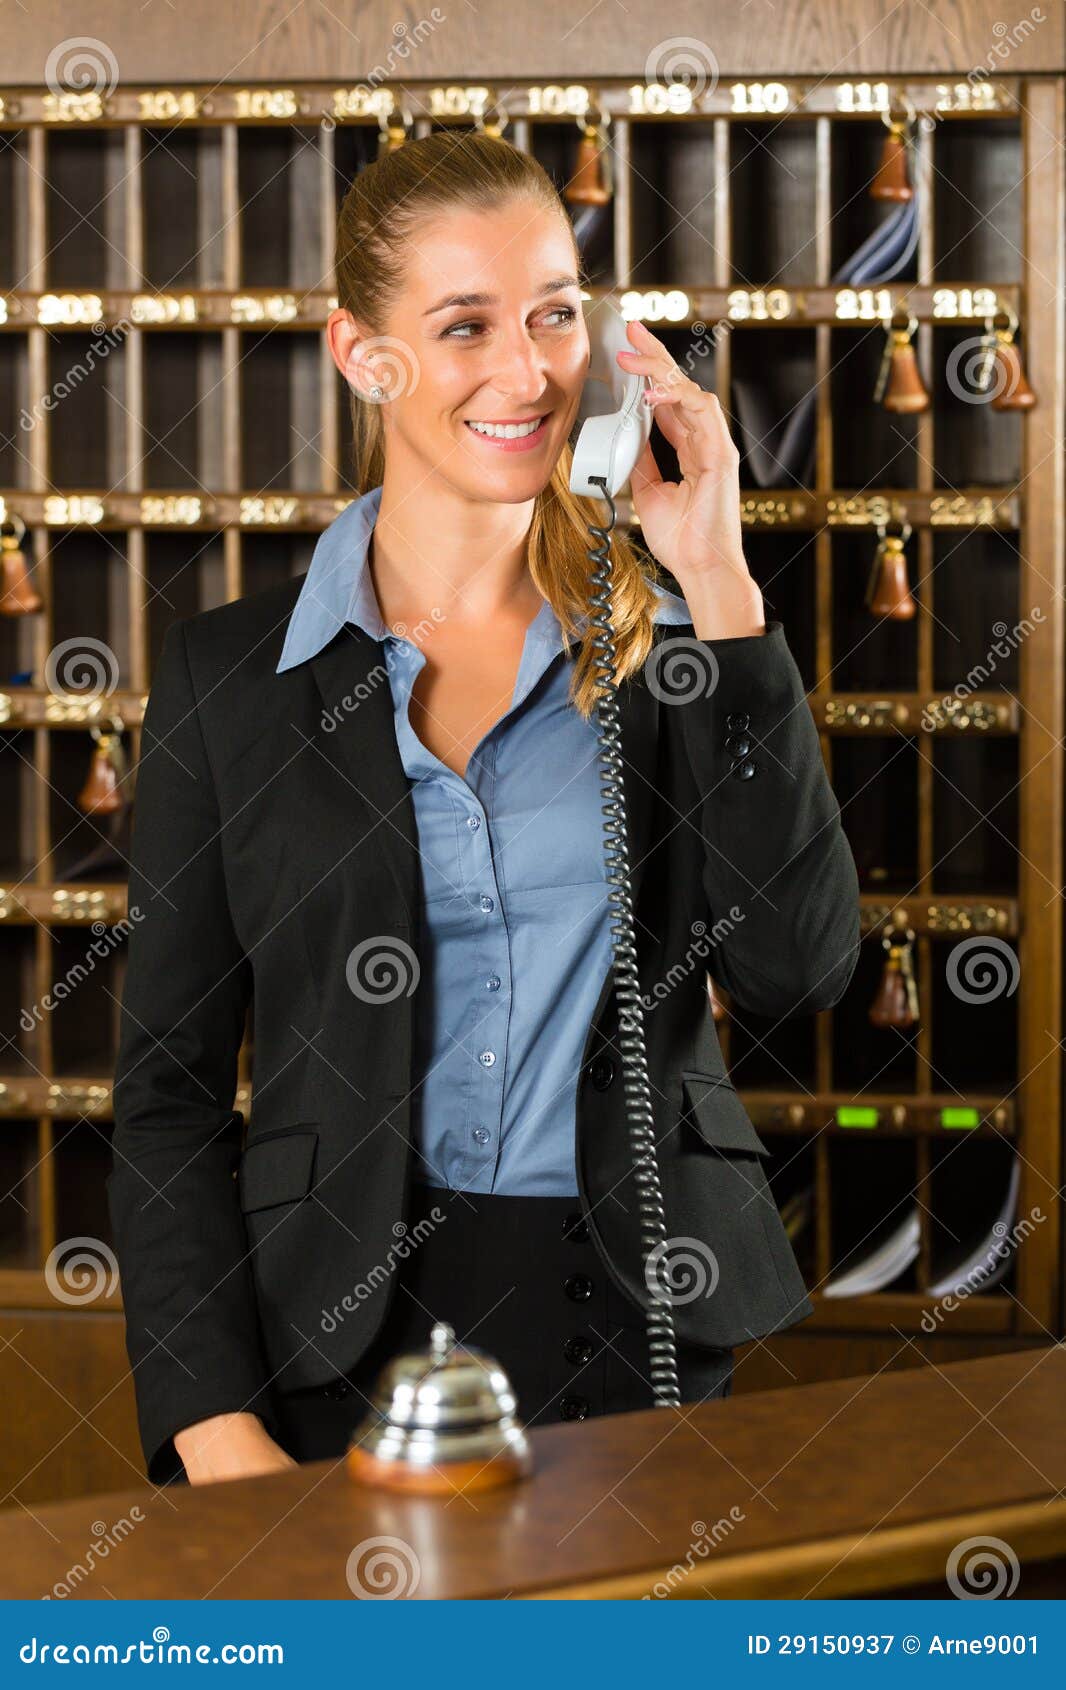 Reception Of Hotel Desk Clerk Taking A Call Stock Image Image